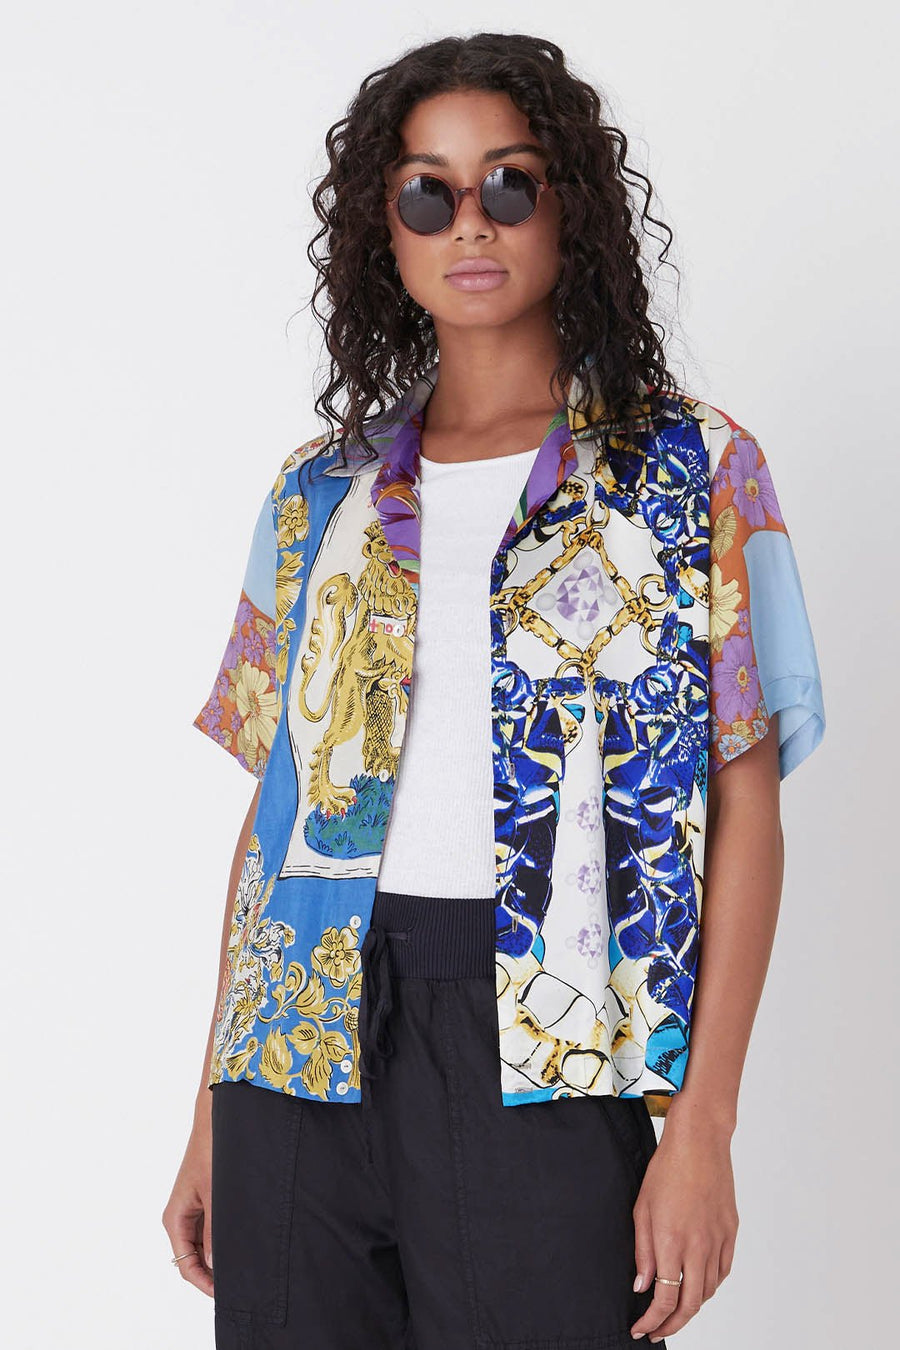 GRAHAM UPCYCLED SCARVES SHIRT - Burning Torch Online Boutique